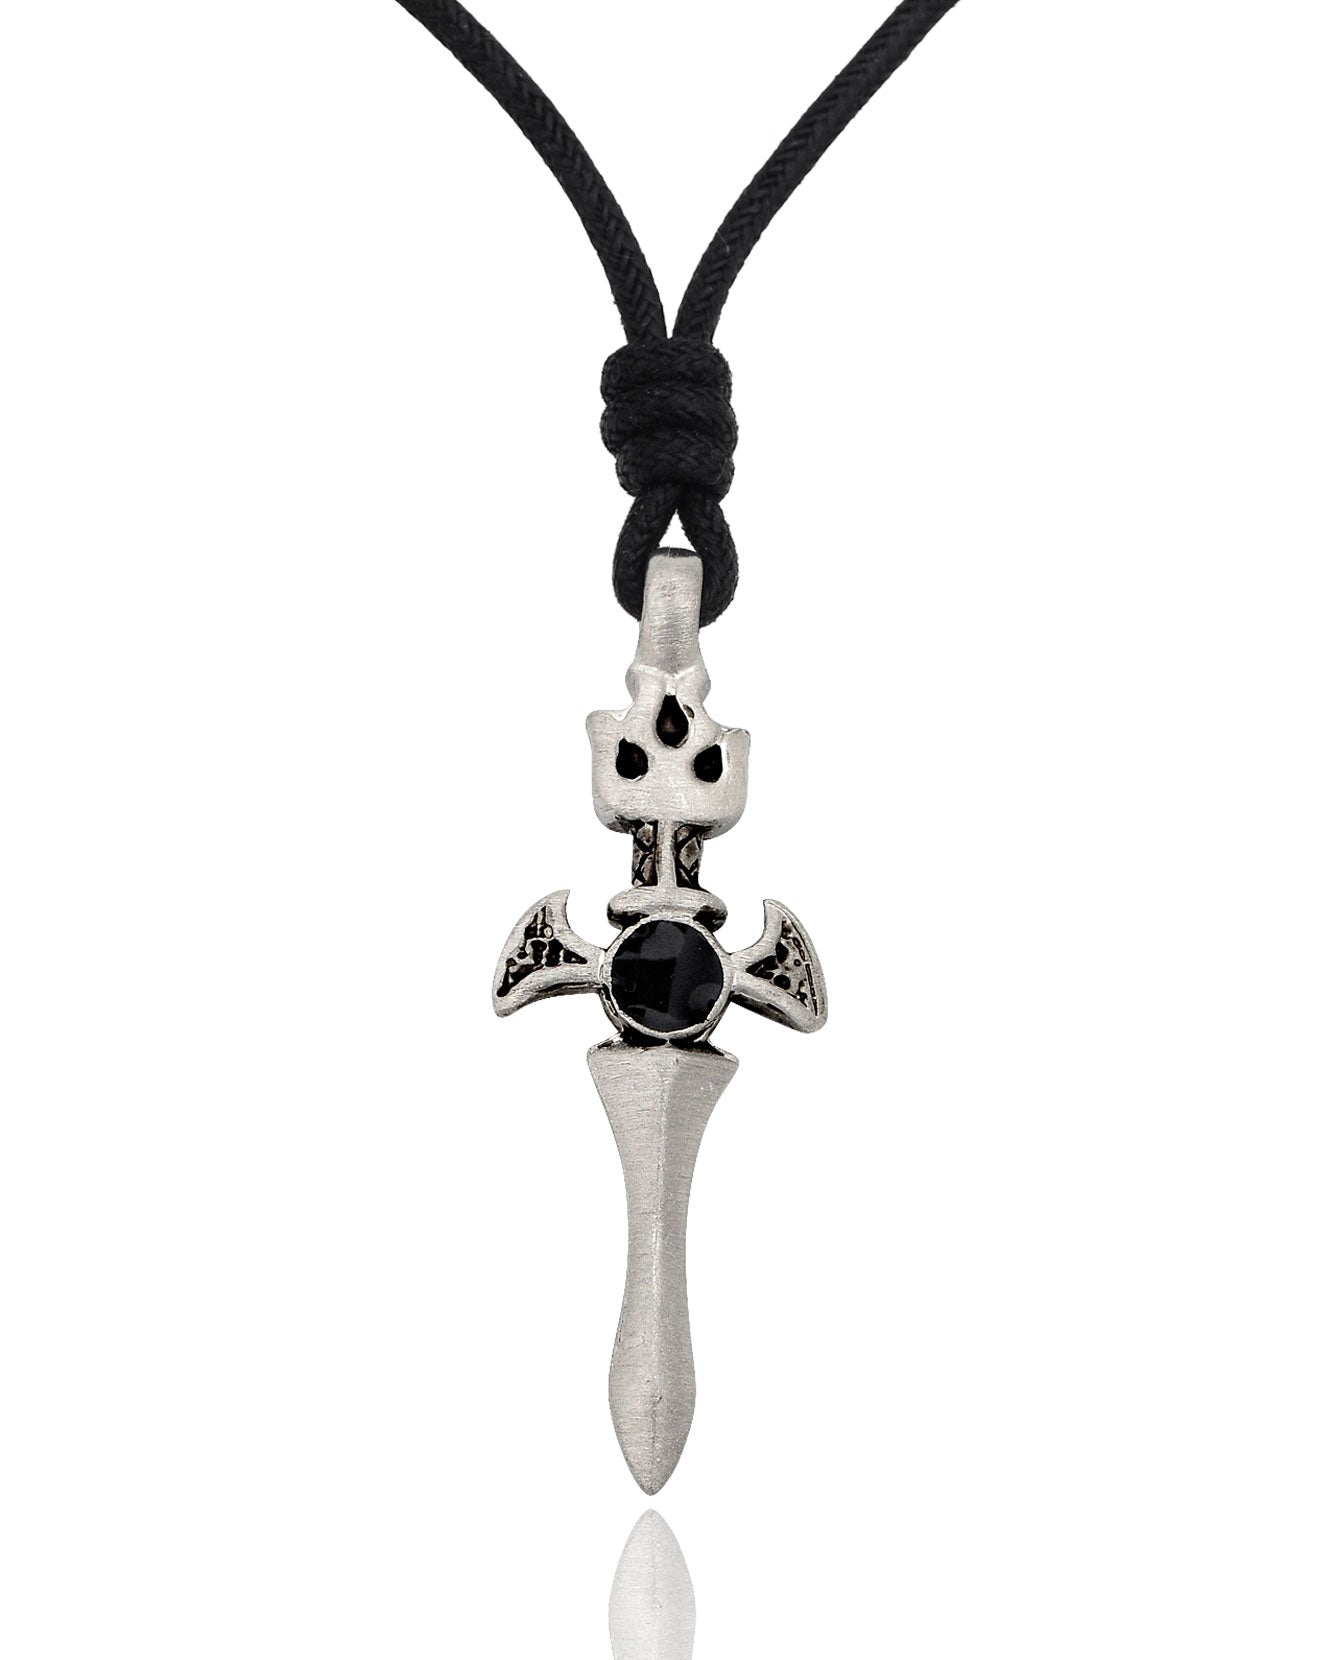 Colorful Fire Sword Silver Pewter Charm Necklace Pendant jewelry